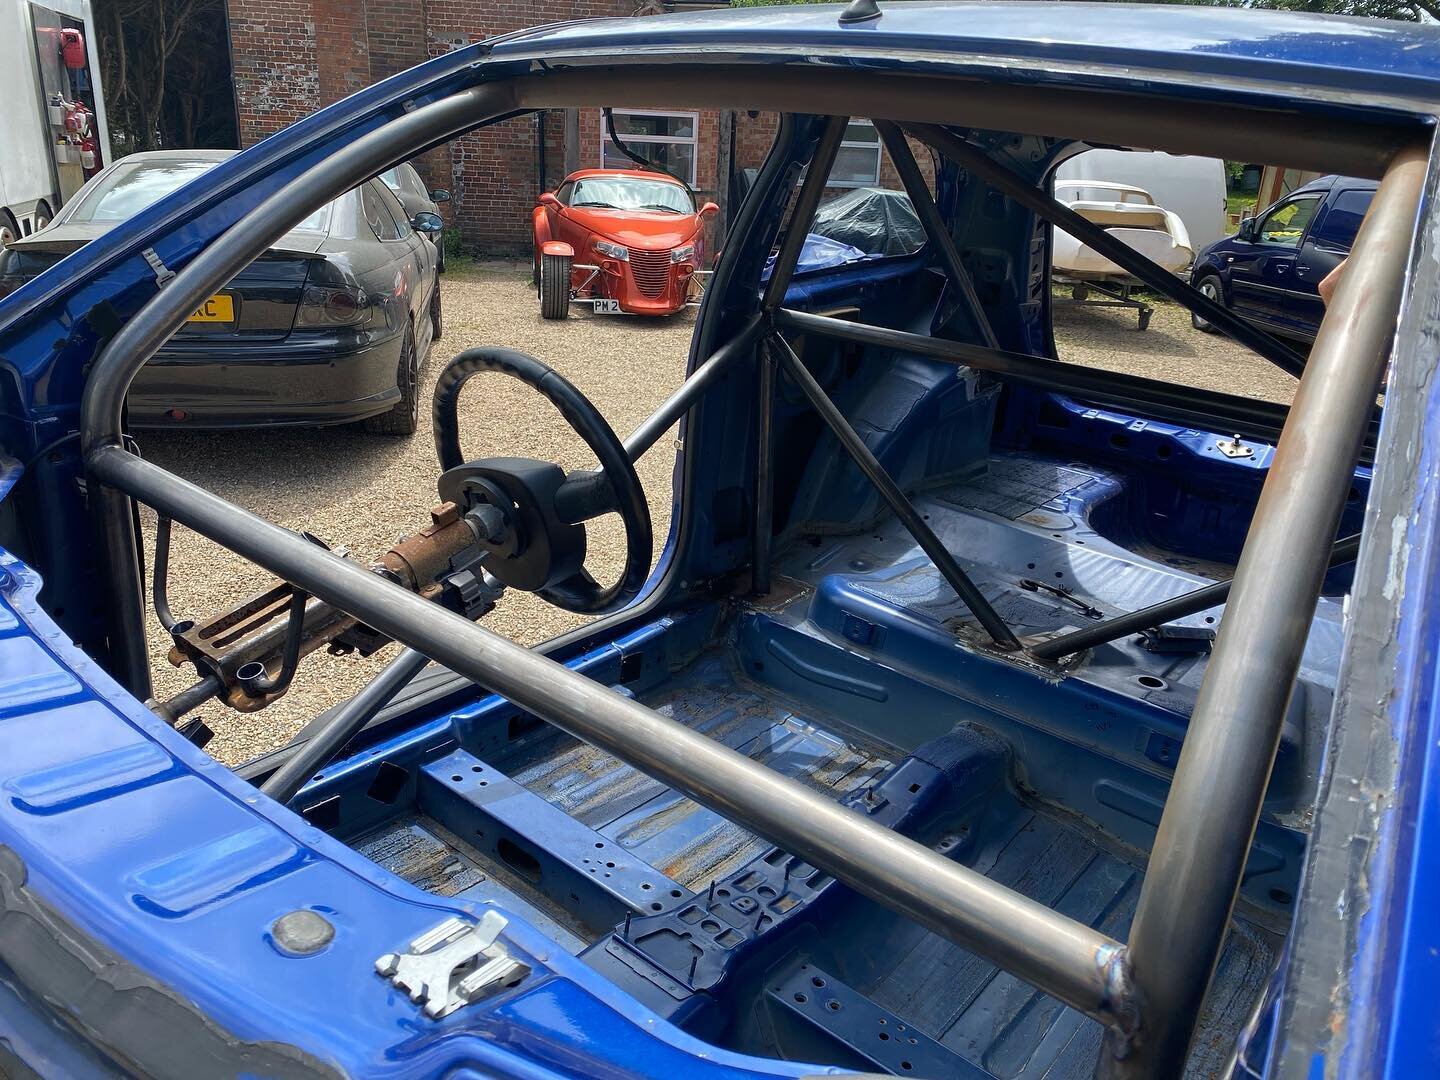 Here is an 8.50 spec cage we manufactured for a Ford Fiesta ST destined for the @europeanfwdshop Front Wheel drive series. Rolled tubes get the cage nice and tight to the shell for maximum interior space. As usual, this cage is made in 4130, CNC bent